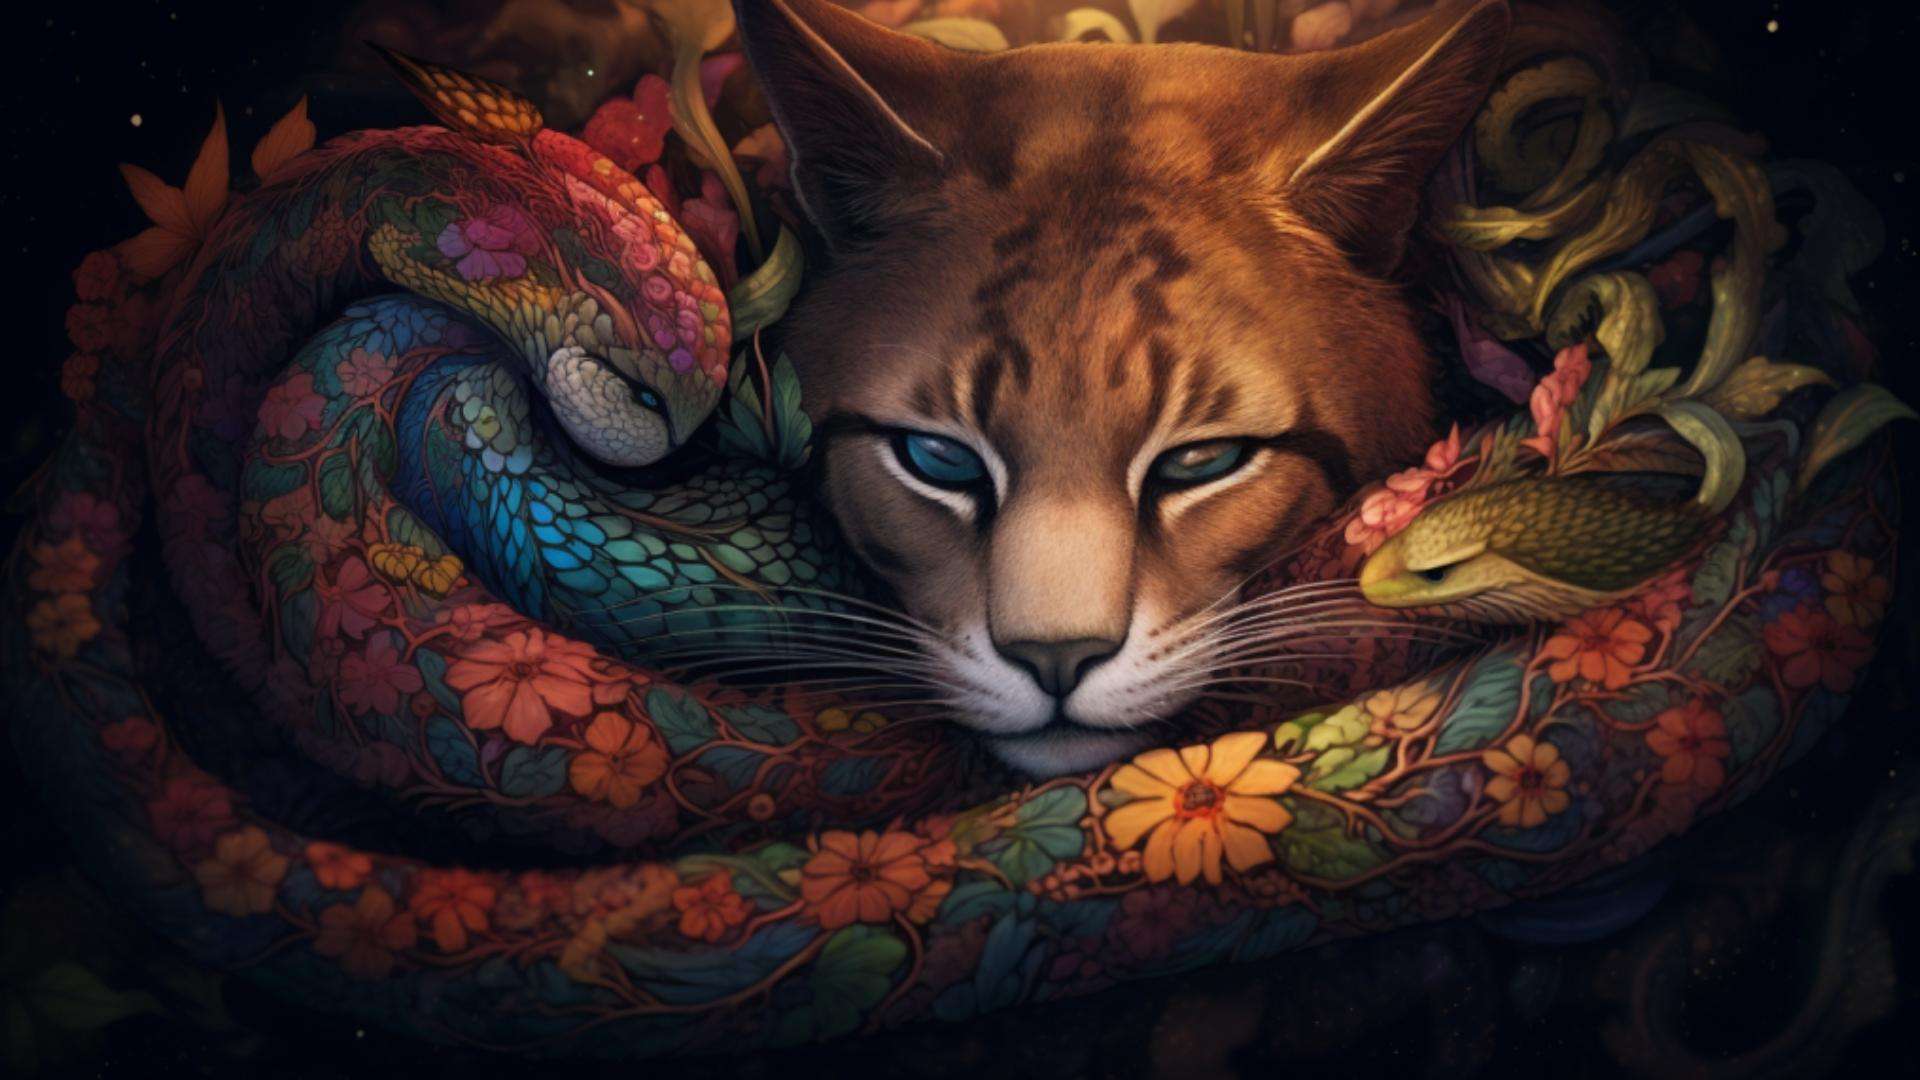 A Lucid dream of cat and snake together